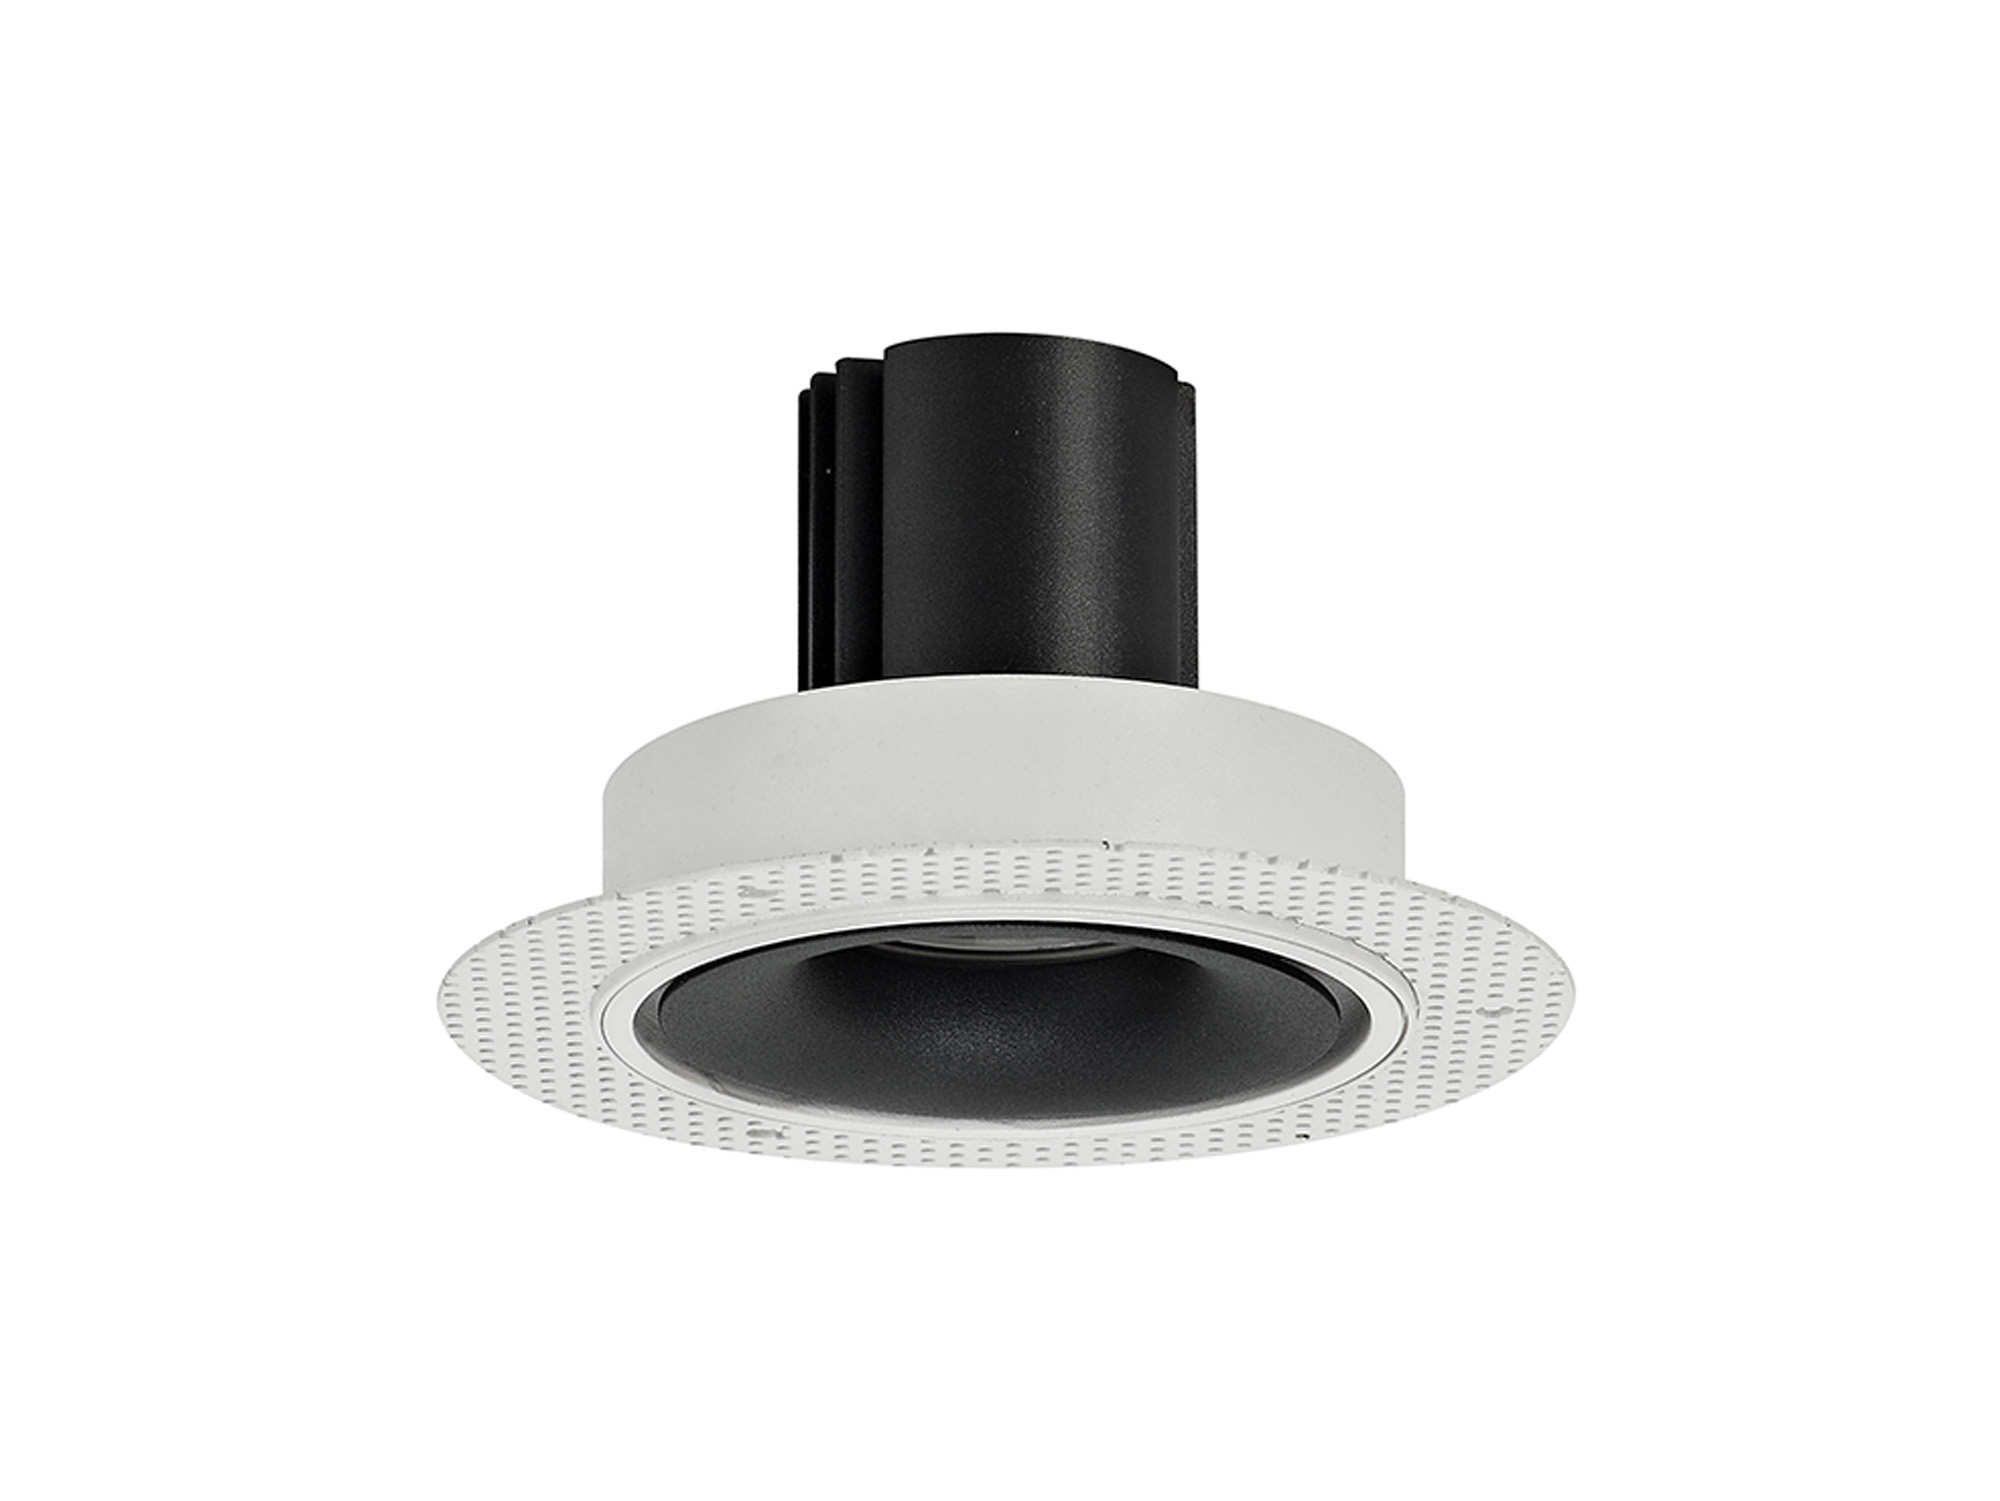 DM202072  Bolor T 9 Tridonic Powered 9W 2700K 770lm 24° CRI>90 LED Engine White/Black Trimless Fixed Recessed Spotlight; IP20